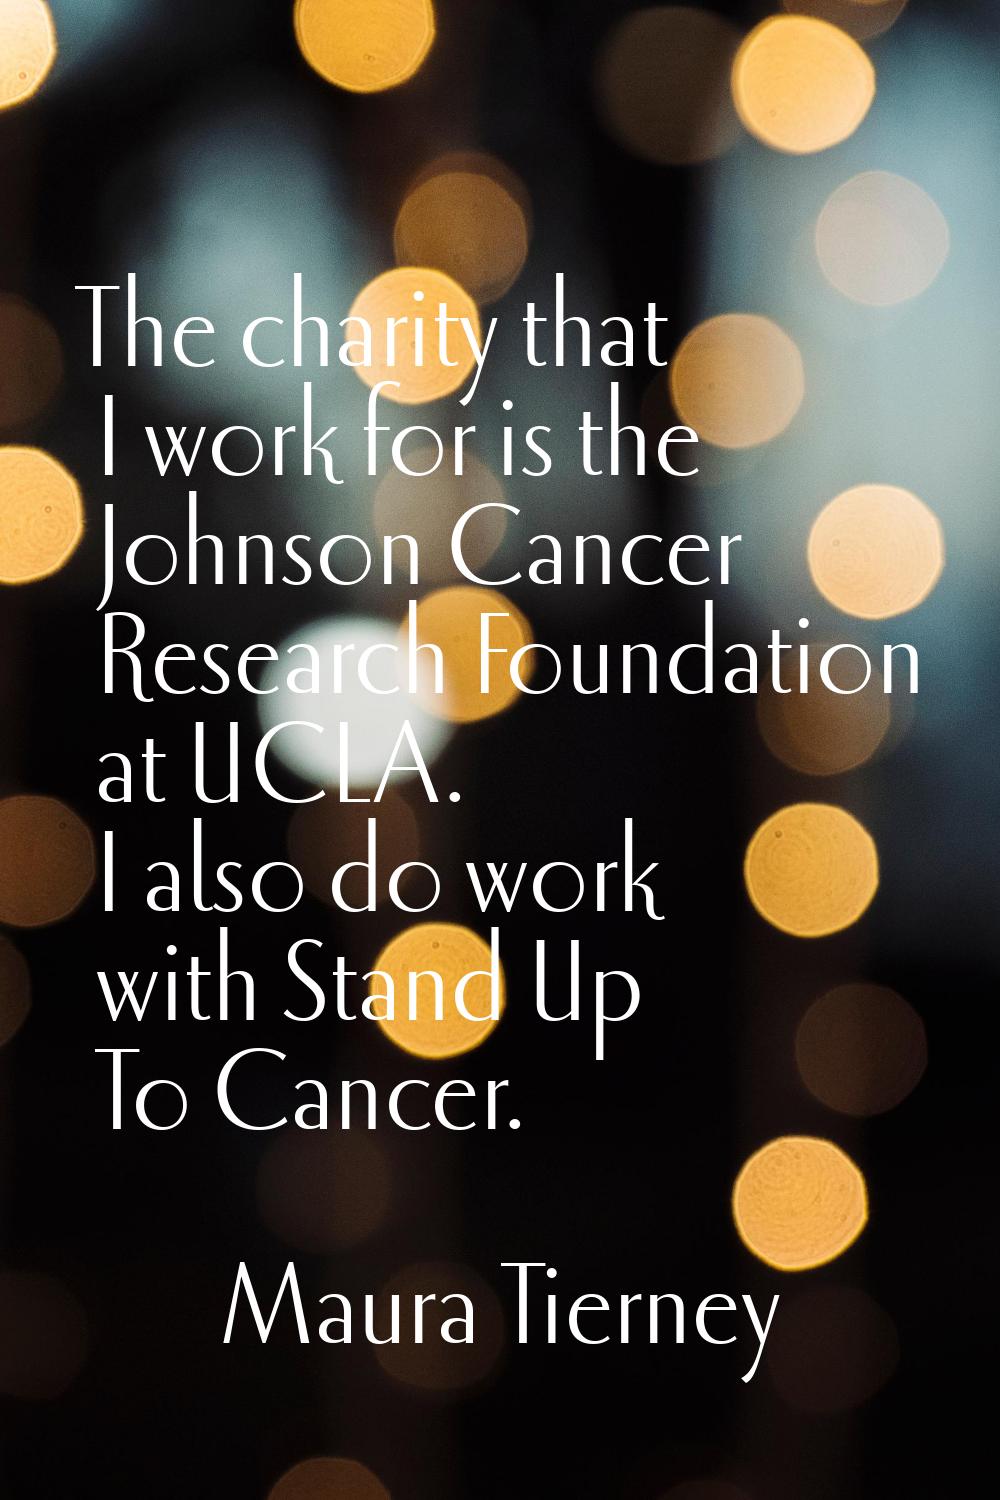 The charity that I work for is the Johnson Cancer Research Foundation at UCLA. I also do work with 